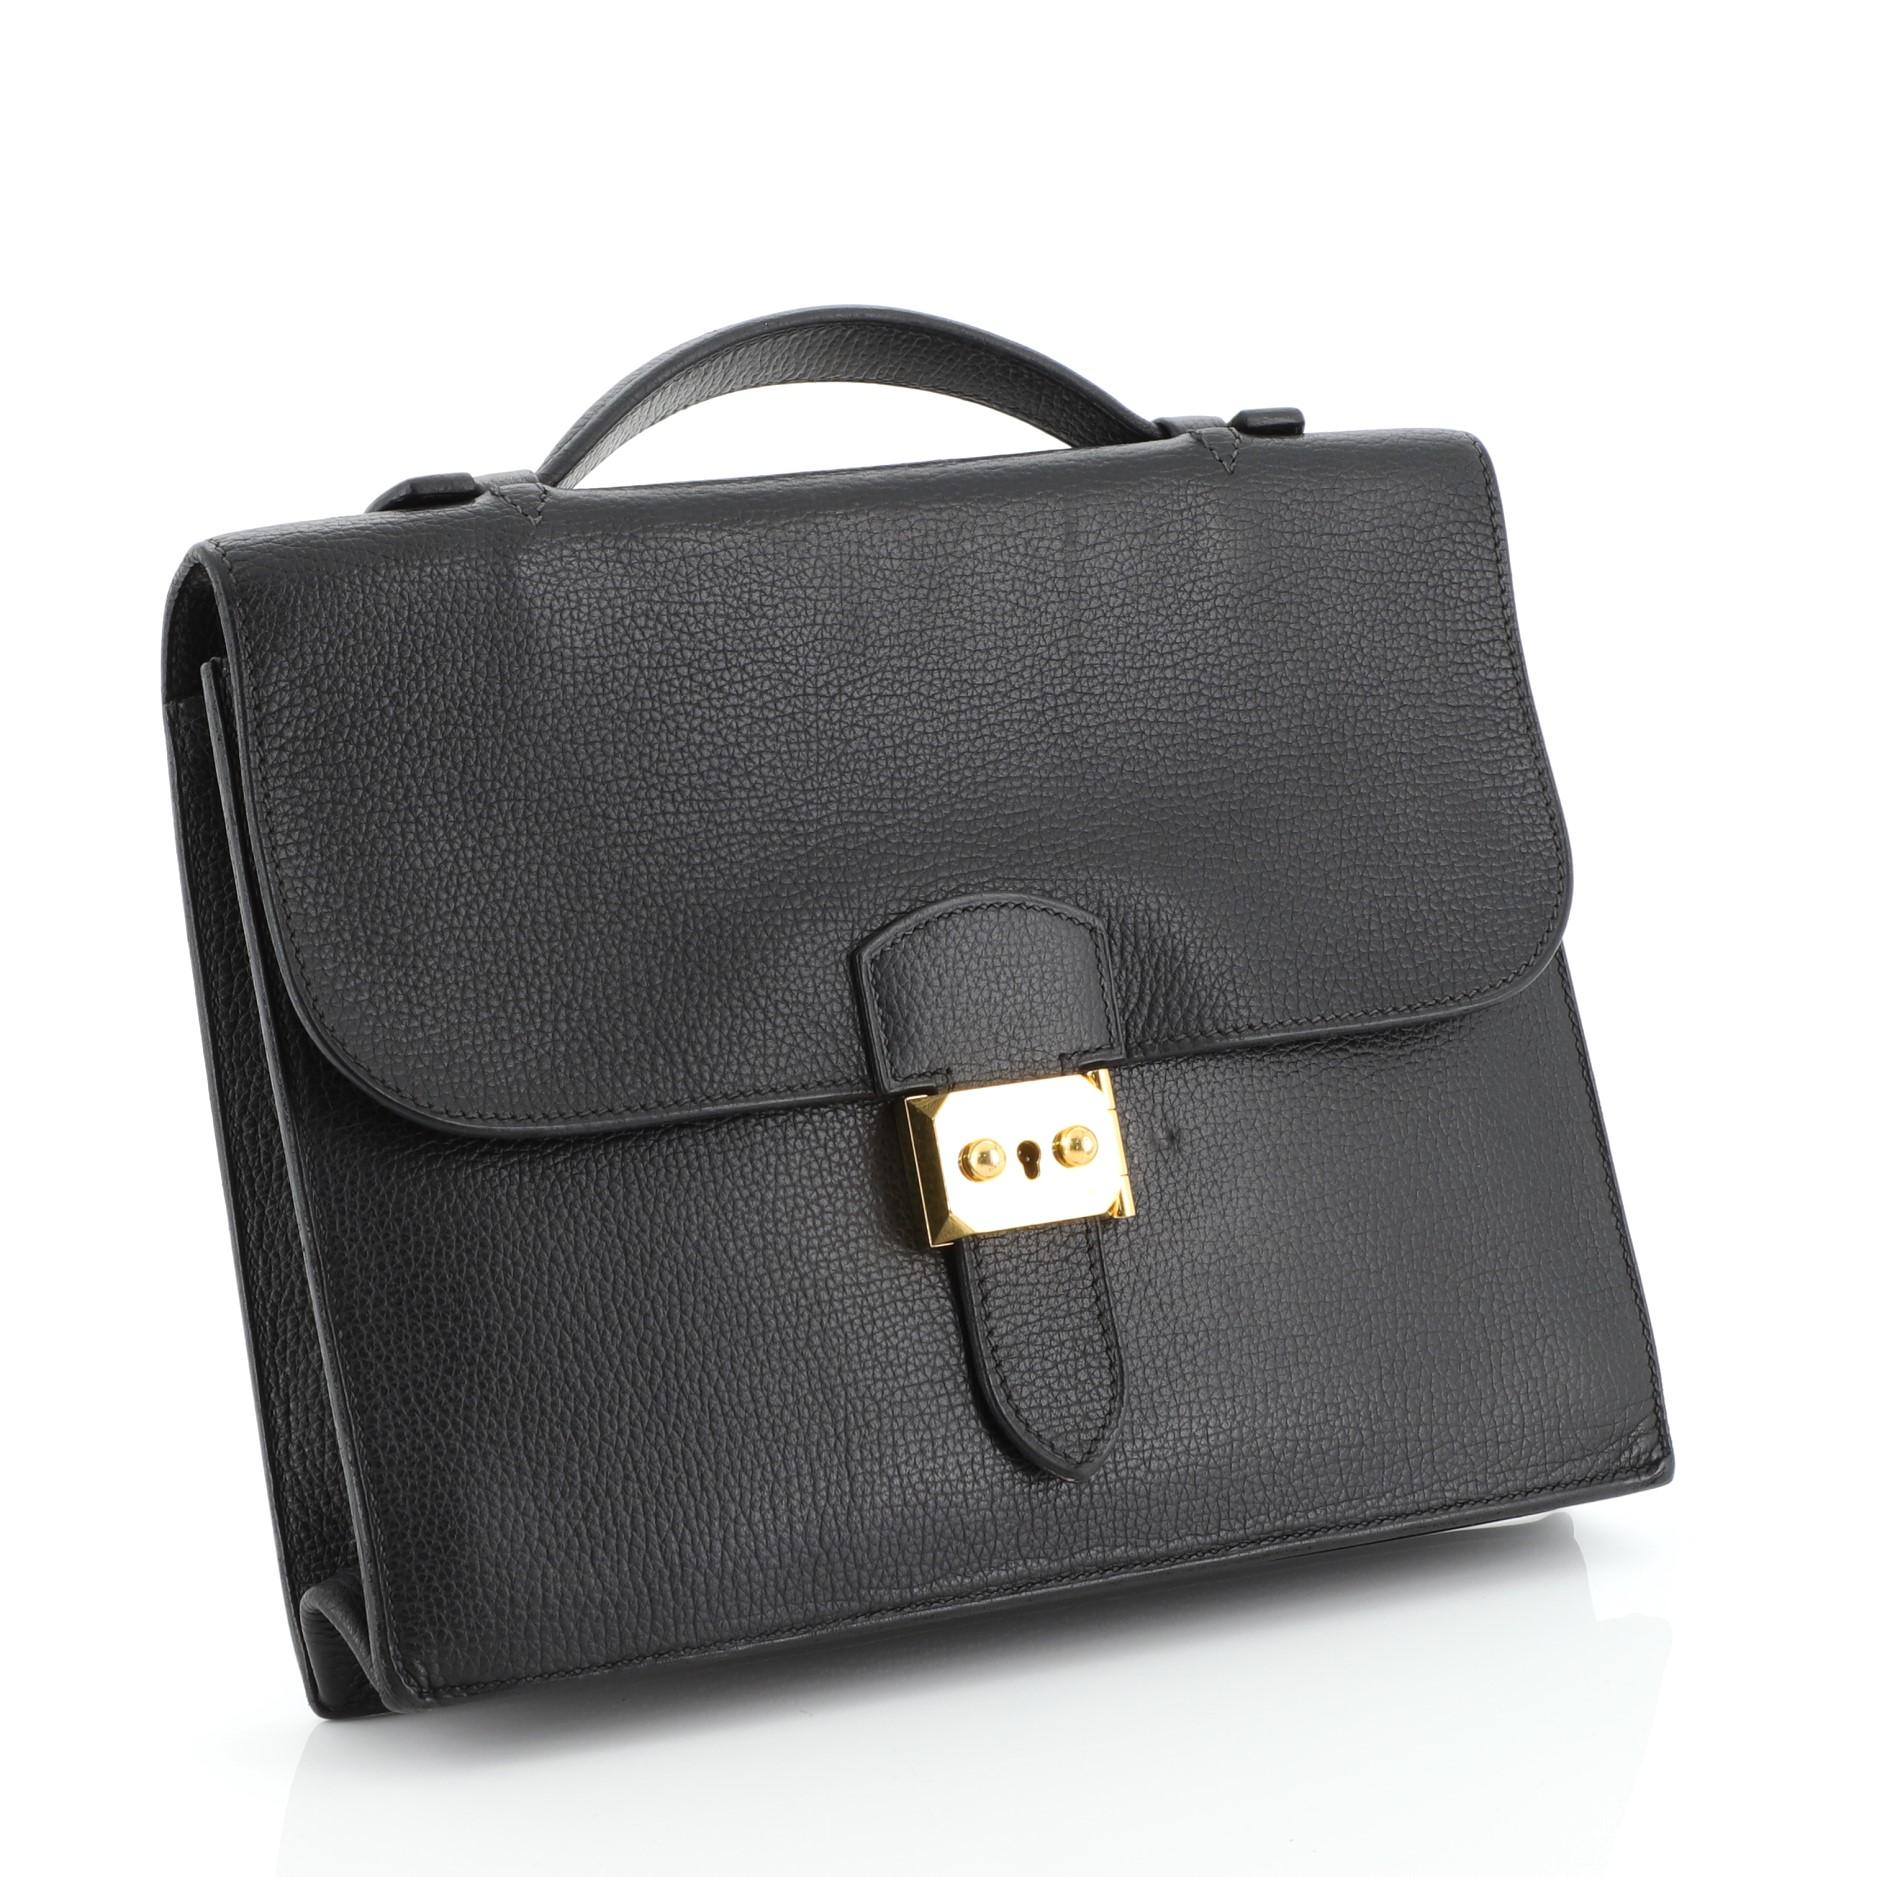 This Hermes Sac a Depeches Bag Togo 27, crafted from Noir black Togo leather, features flat top handle, accordion side gussets, and gold hardware. Its flip lock closure opens to a Noir black raw leather interior with two main compartments and slip